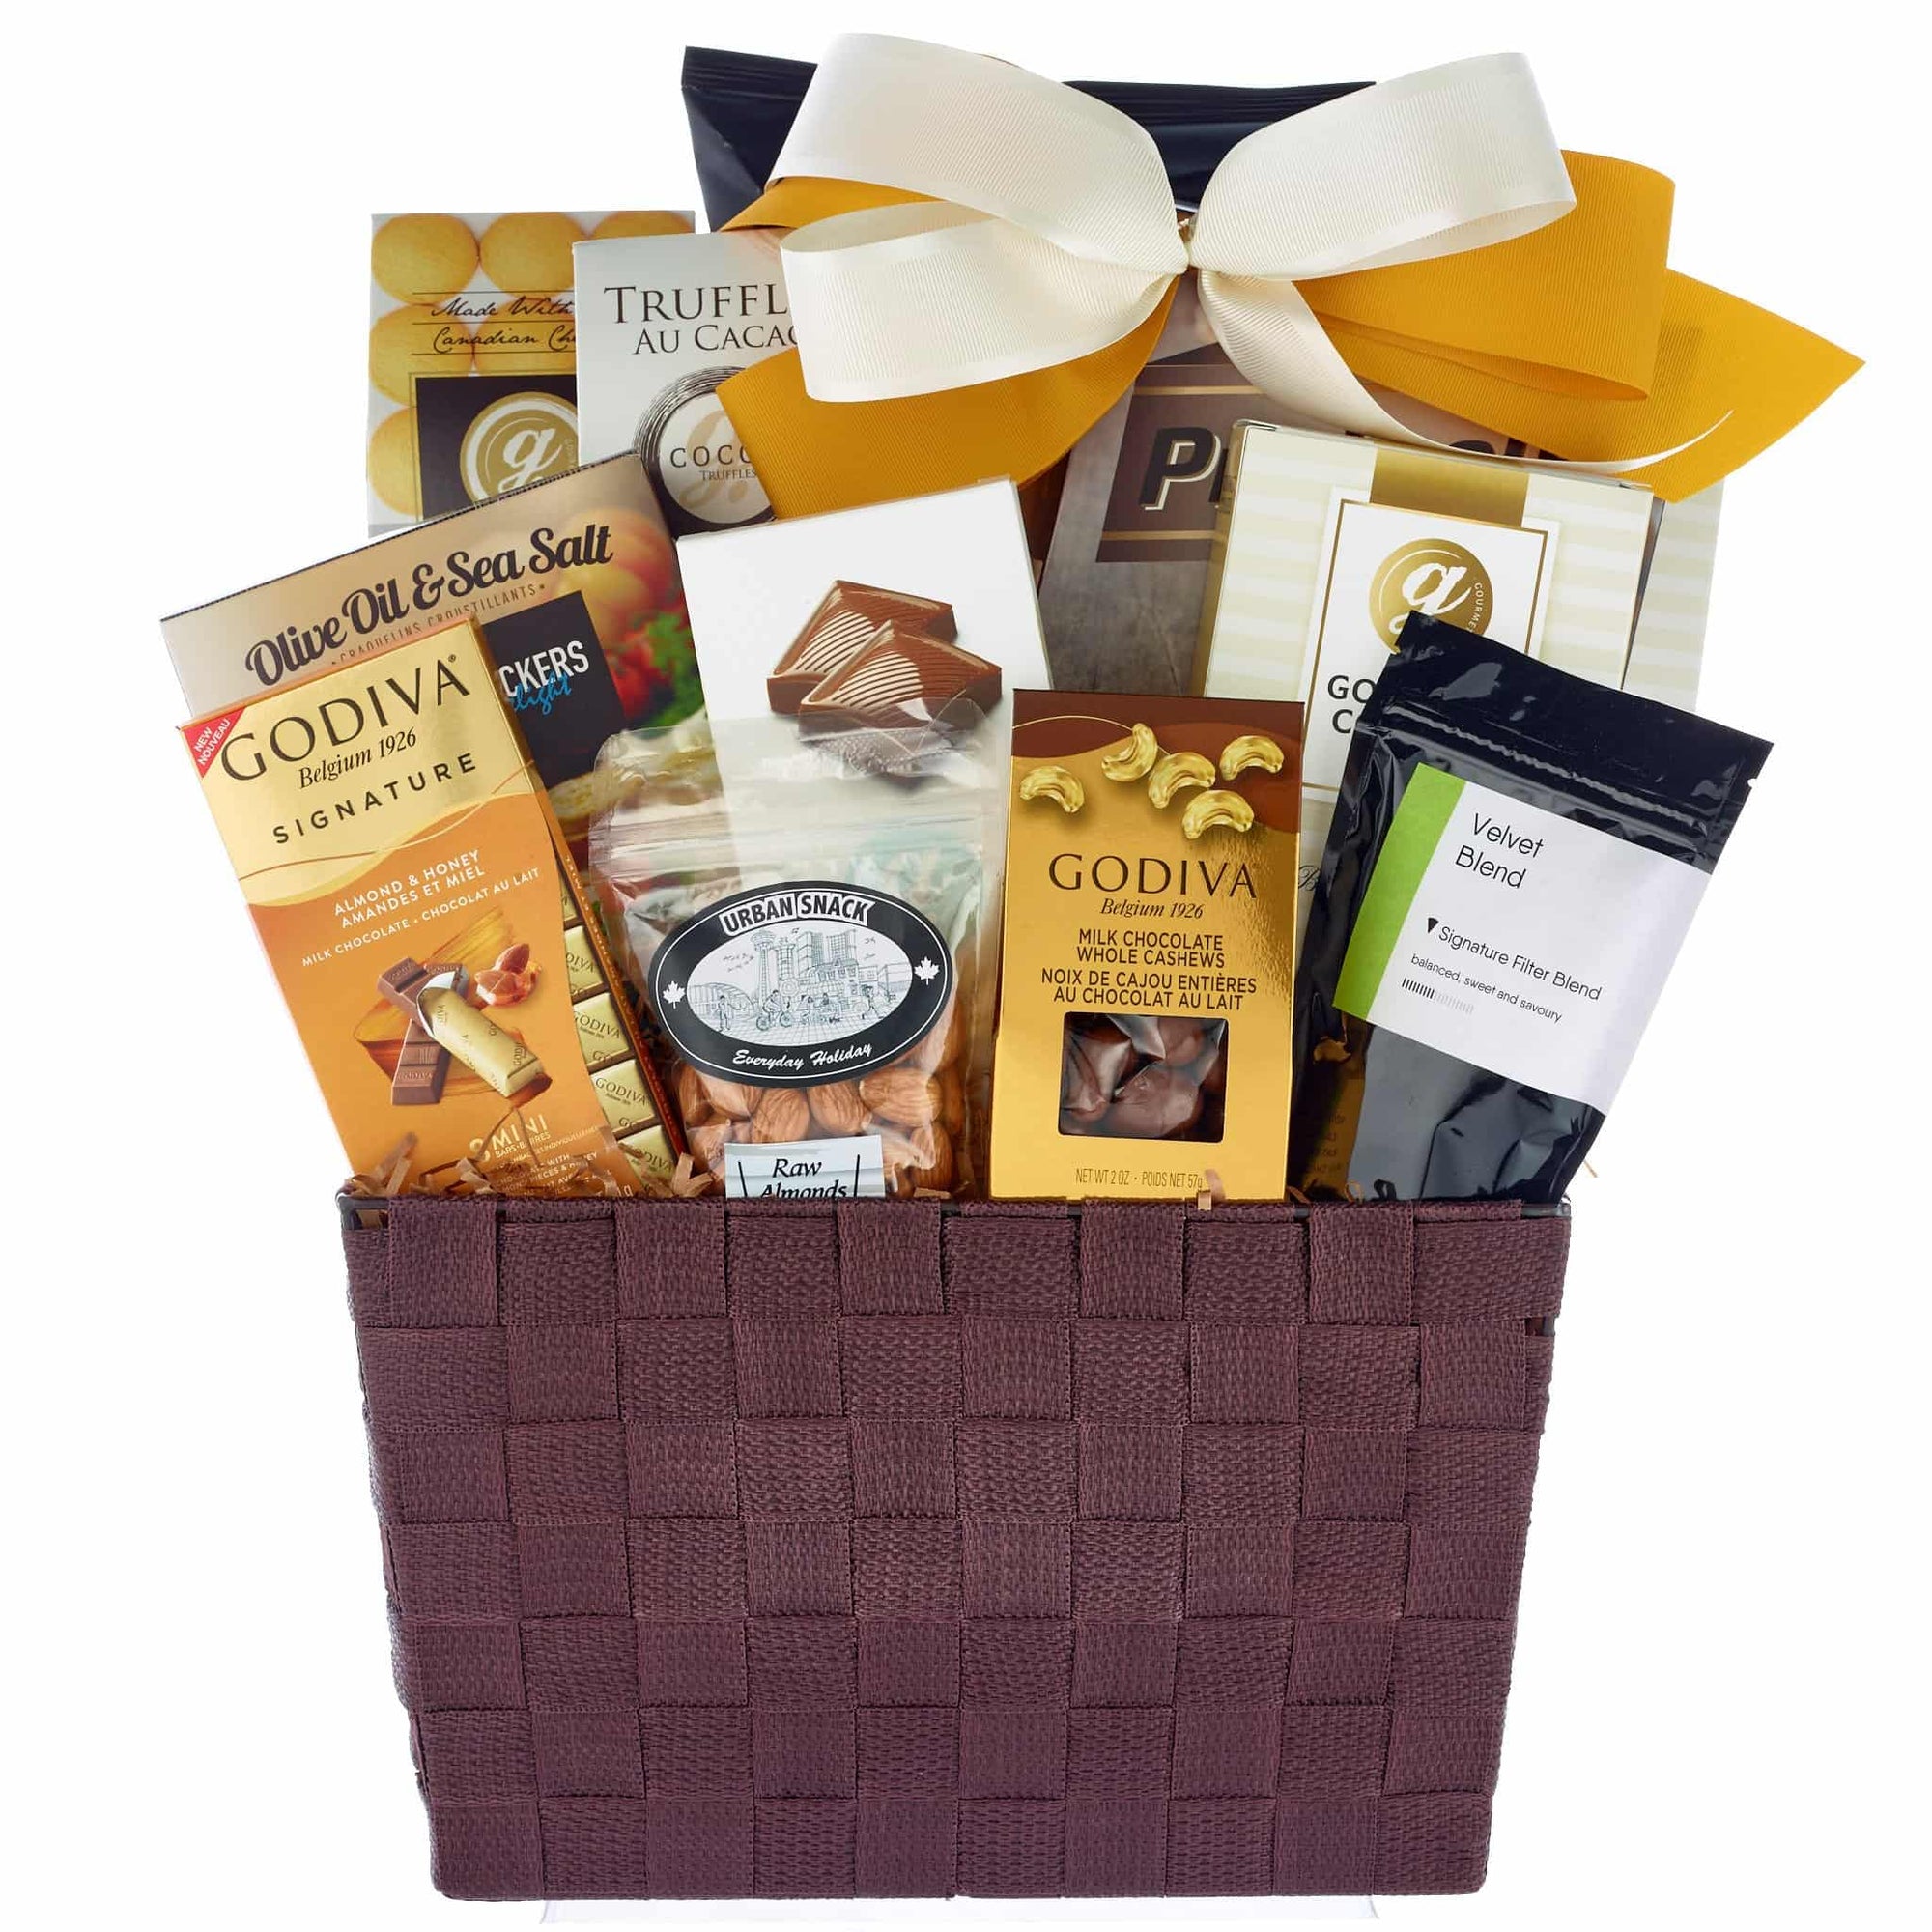 A gourmet basket delivery all across Canada